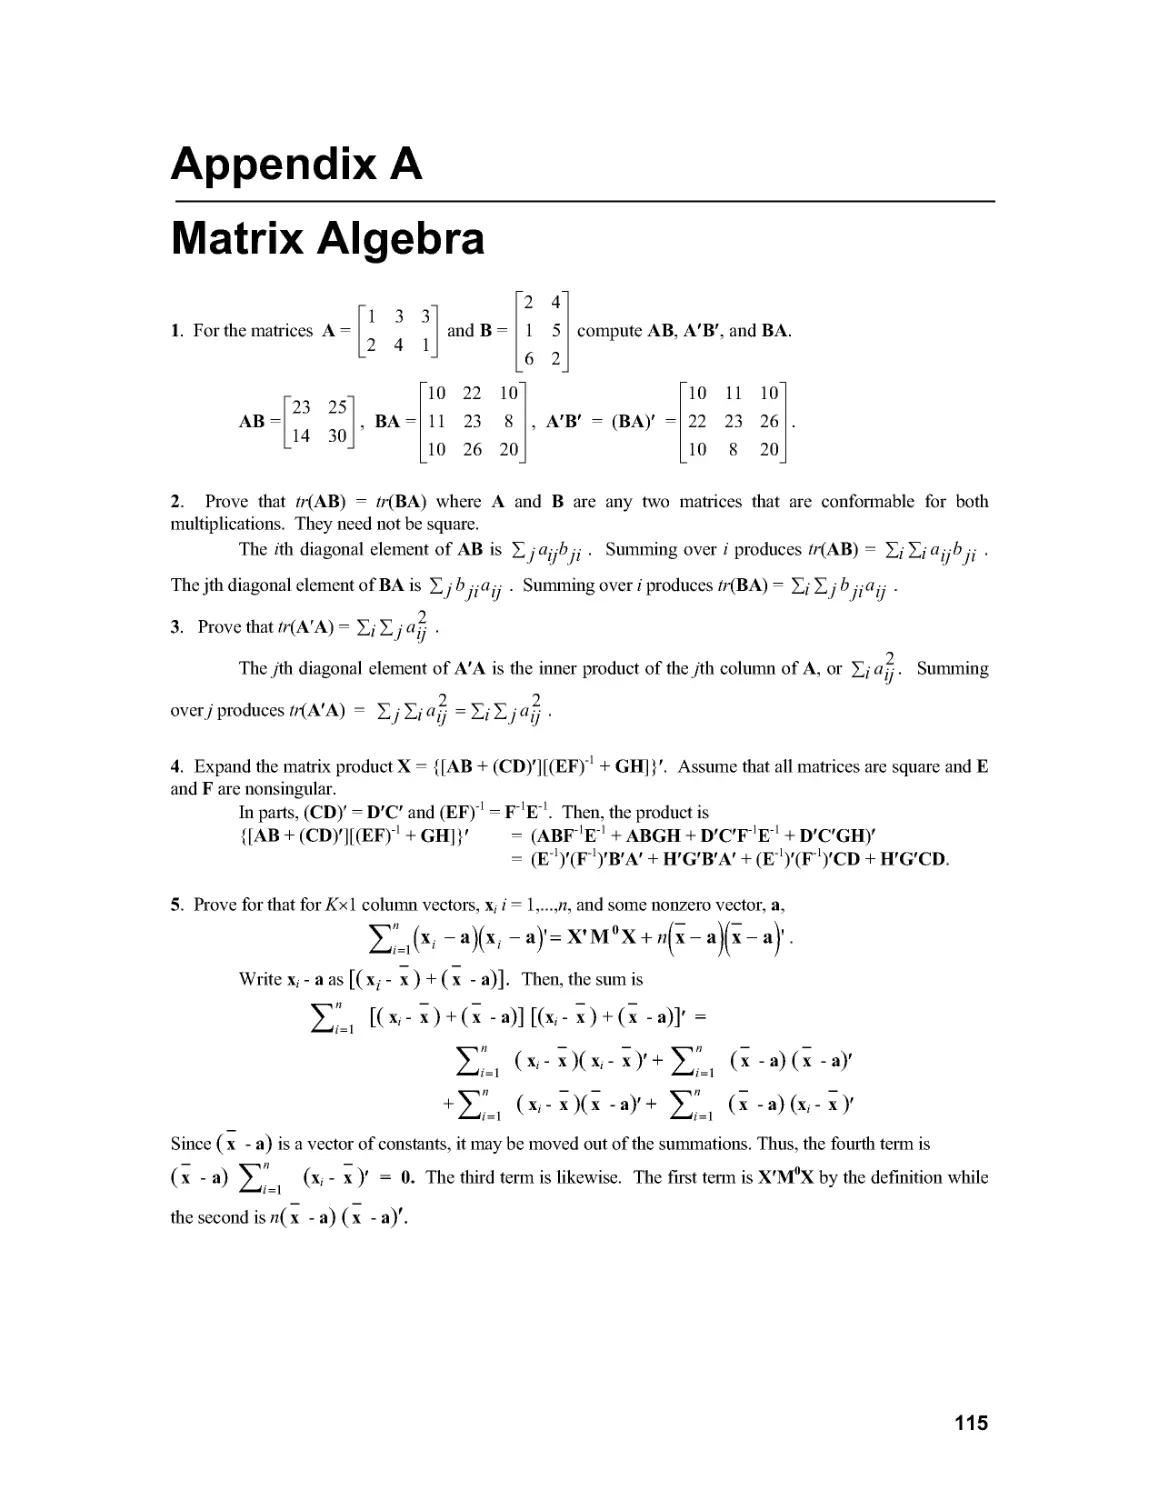 1.  For the matrices  A =  and B =  compute AB, A(B(, and BA.
.